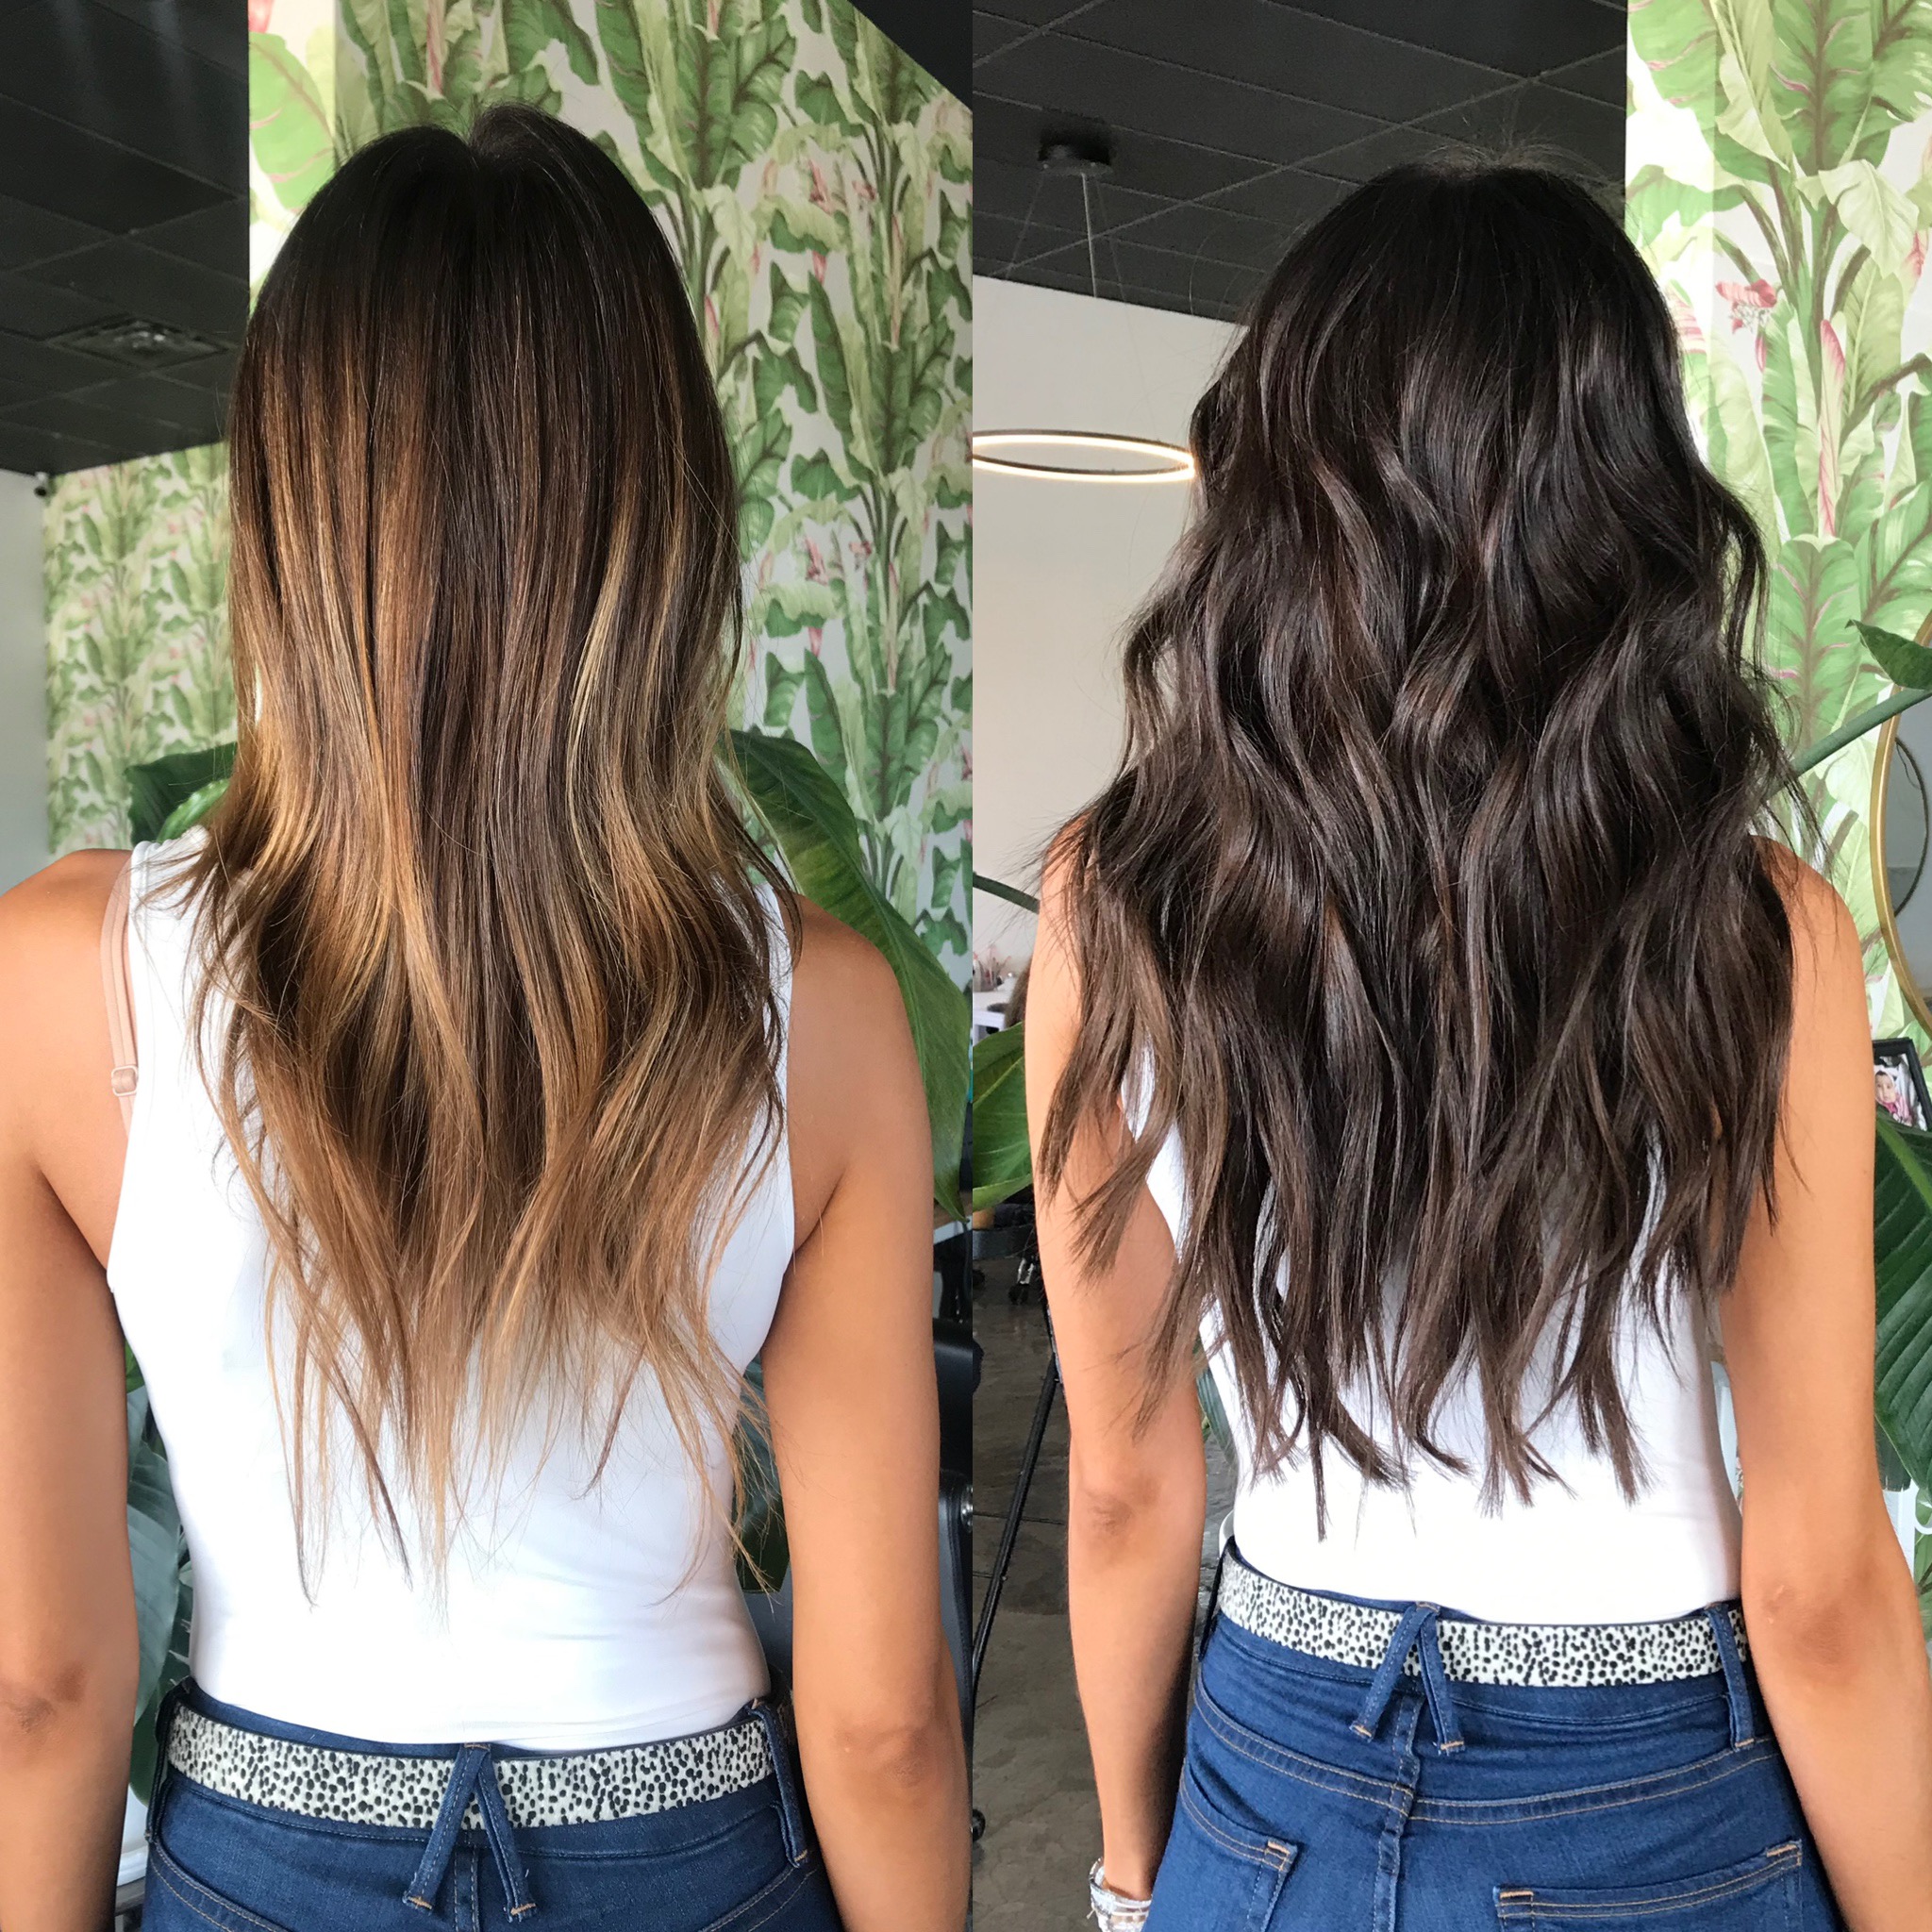 Hand Tied Hair Extension Before and After, FAQ, and Cost